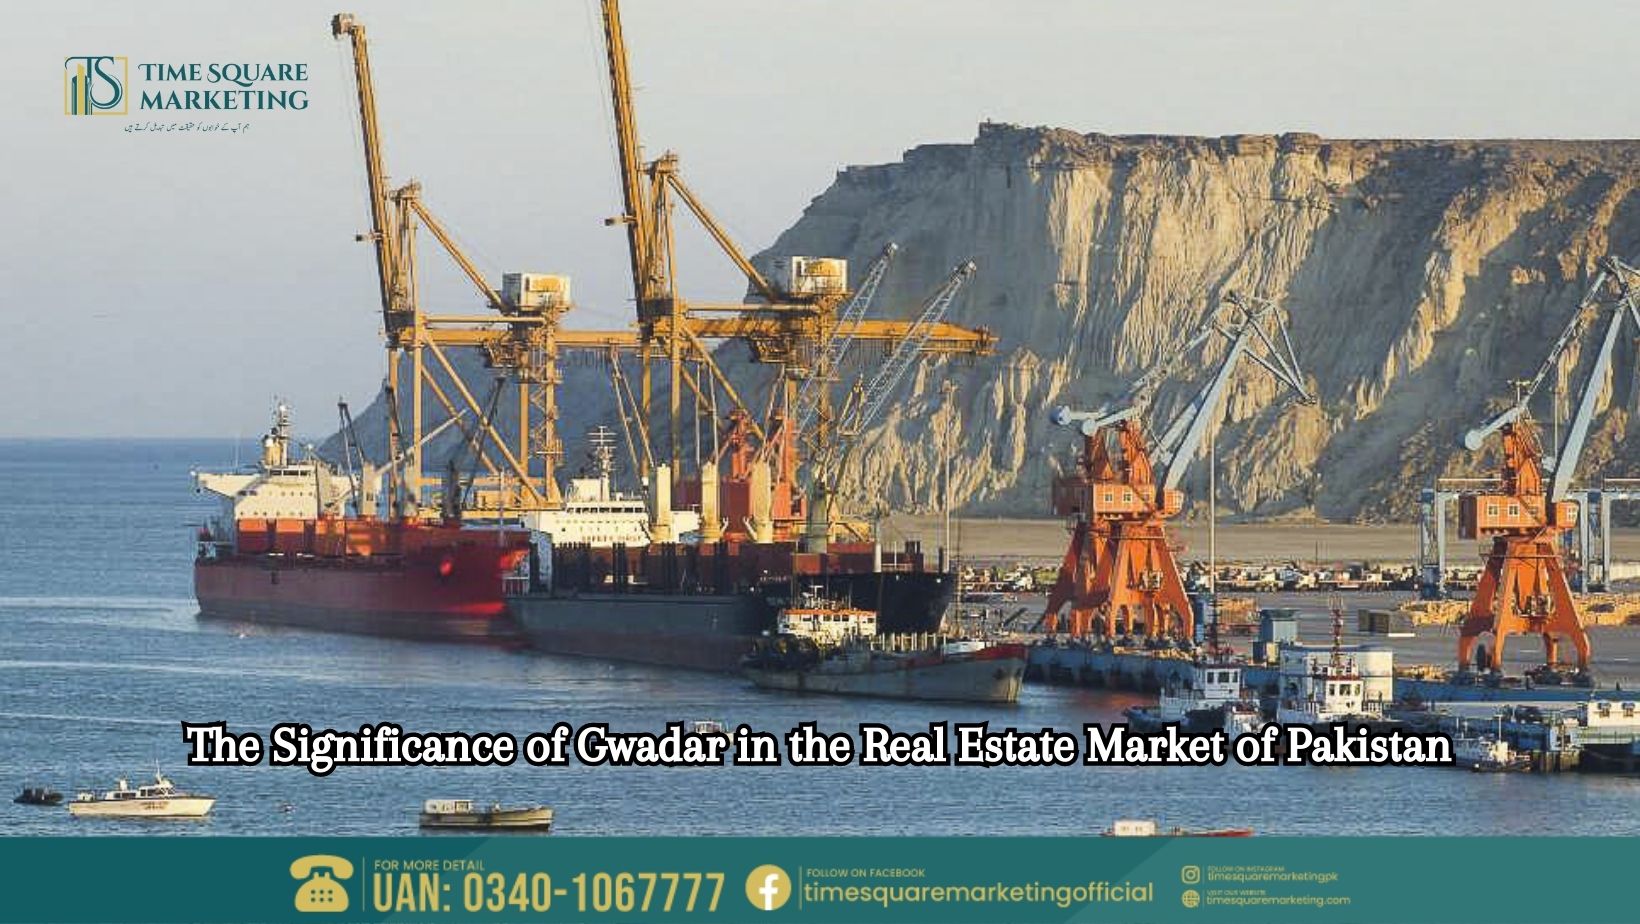 The Significance of Gwadar in the Real Estate Market of Pakistan